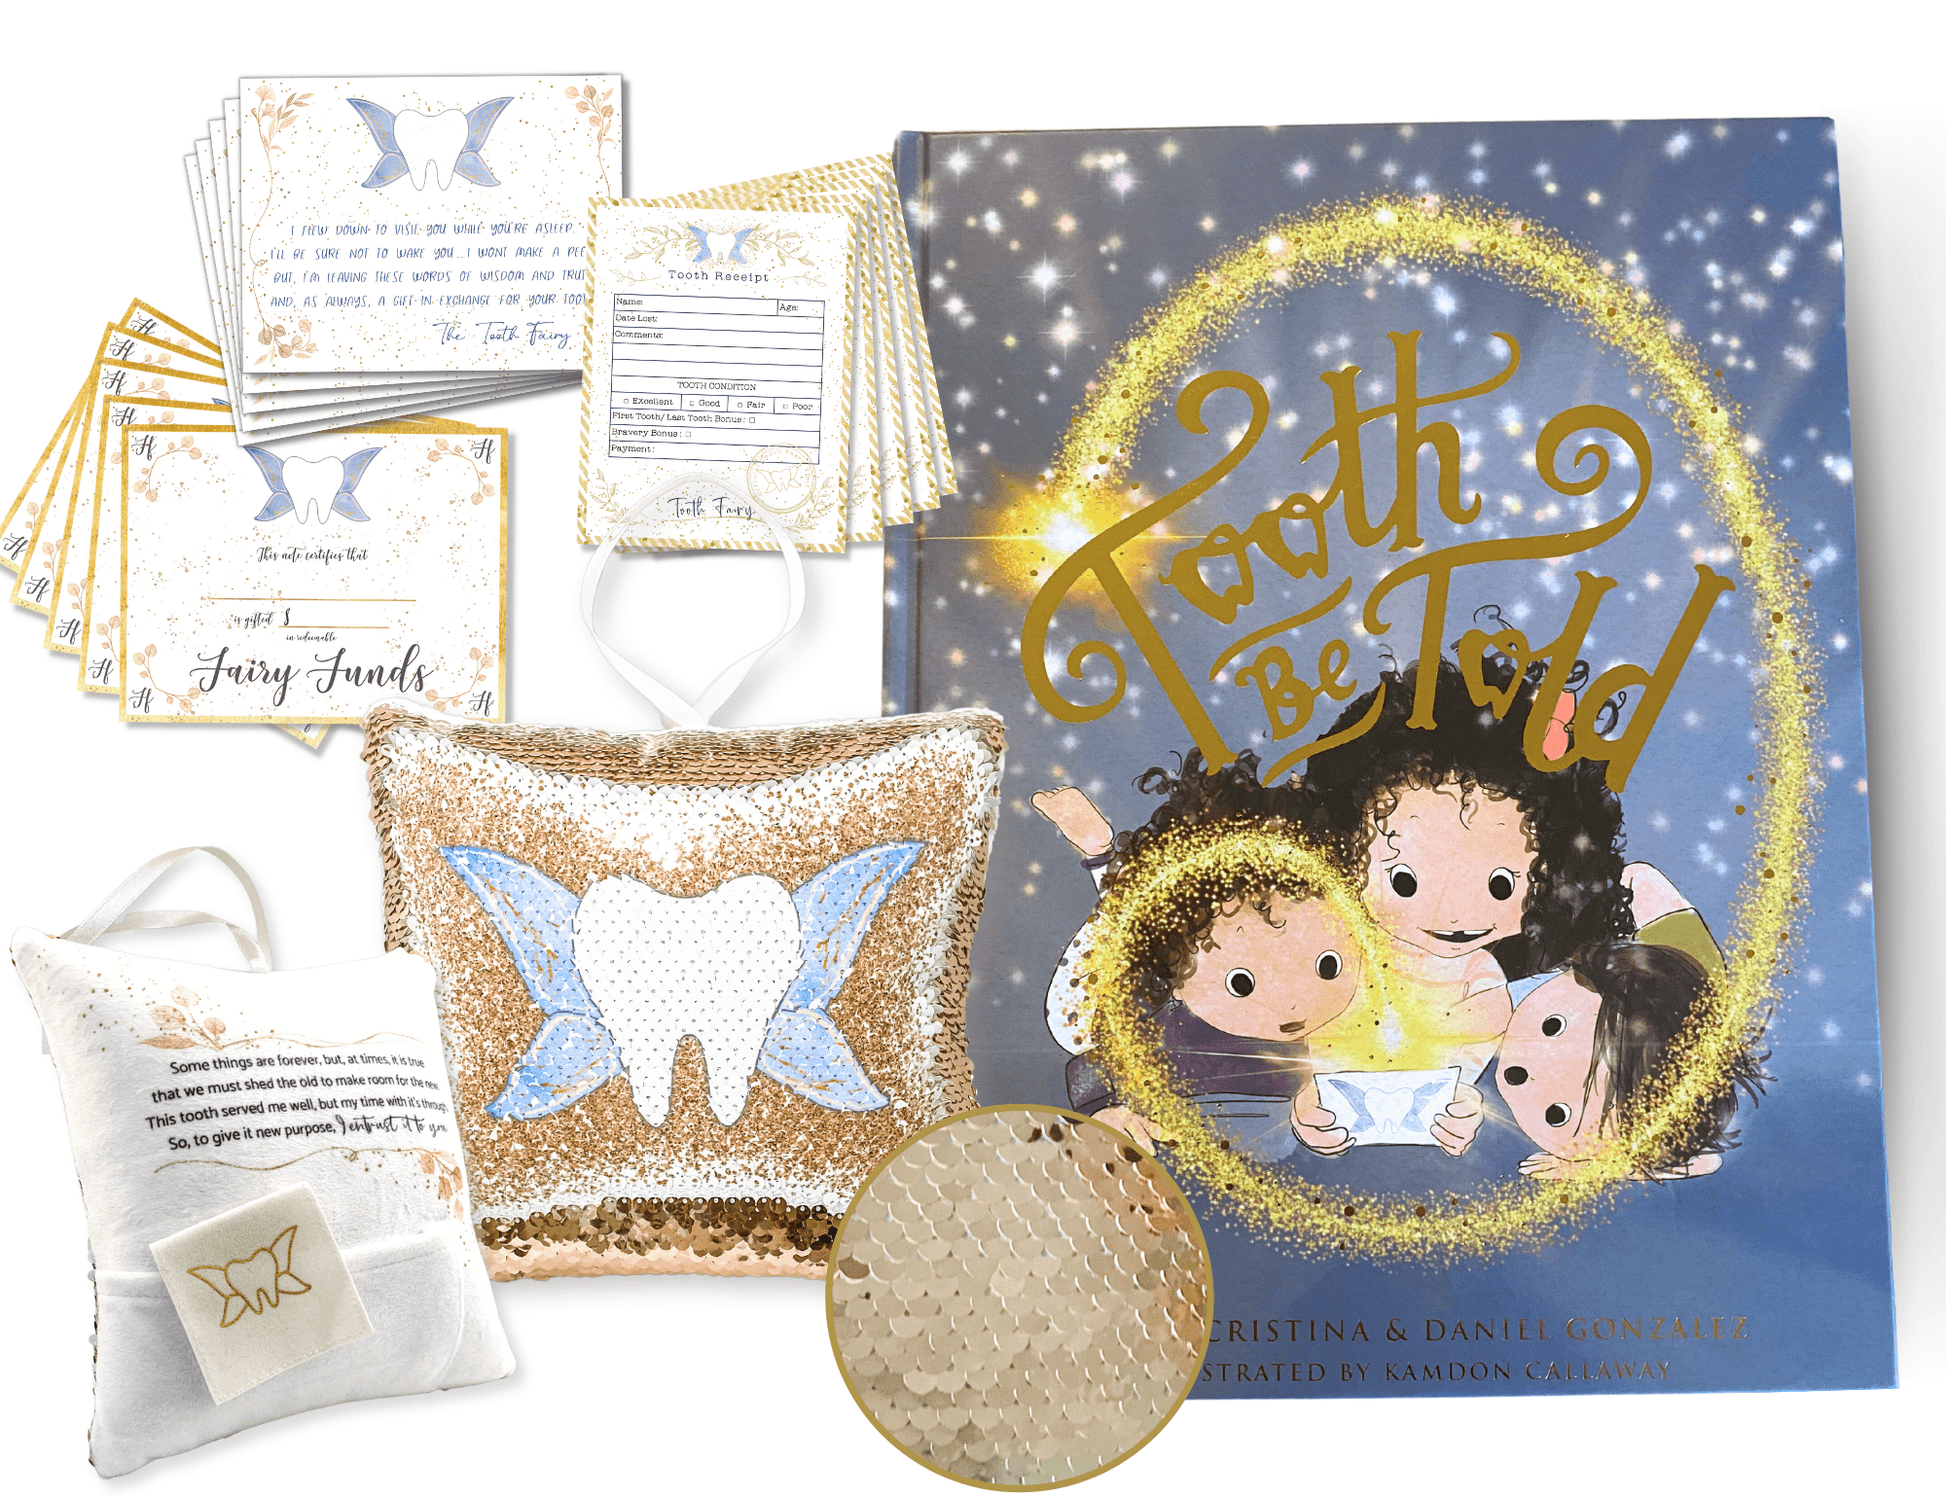 Tooth Fairy Pillow Kit w/ Tooth Fairy Book for Kids- Tooth Be Told Book, Fairy Letter Kit, & Tooth Fairy Pillow - 20MomentsofTooth